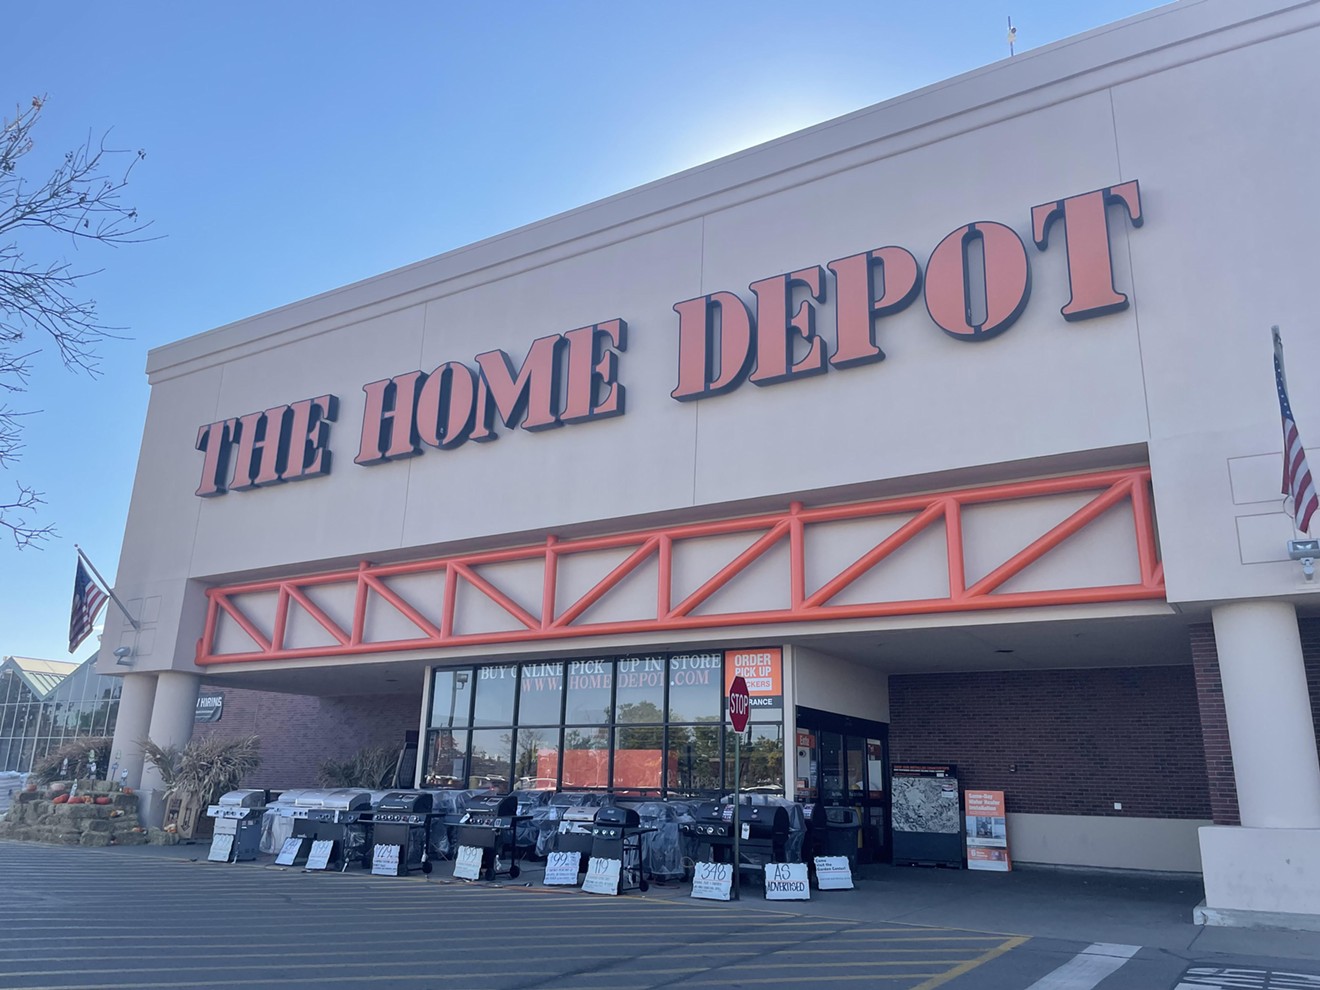 Hot dog stands have largely disappeared from Home Depot stores.